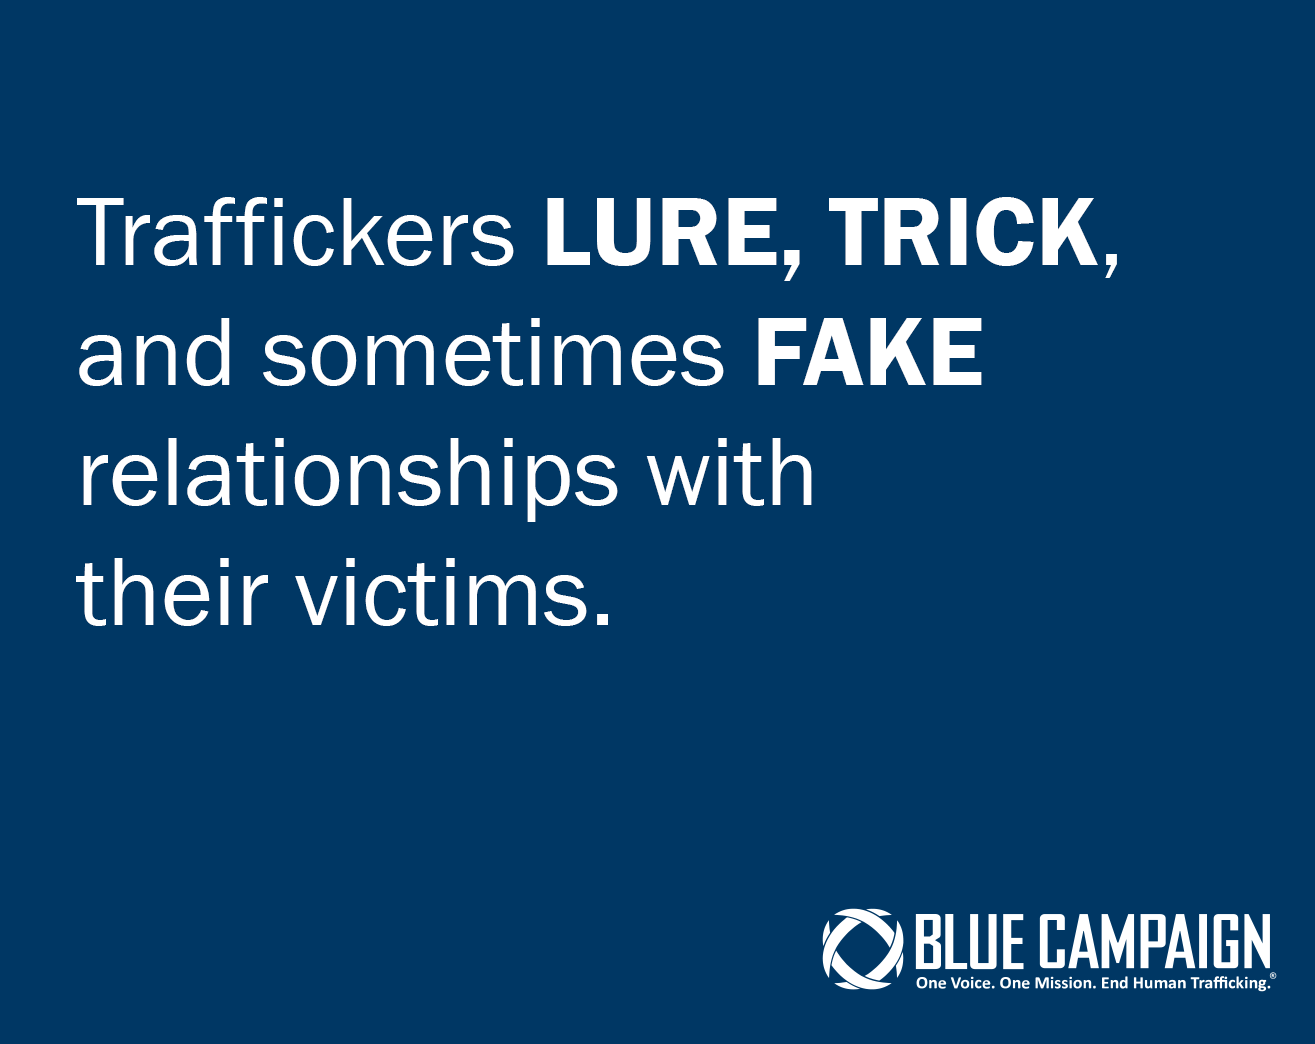 Traffickers lure, trick, and sometimes fake relationships with their victims. Blue Campaign - One Voice. One Mission. End Human Traffcking.